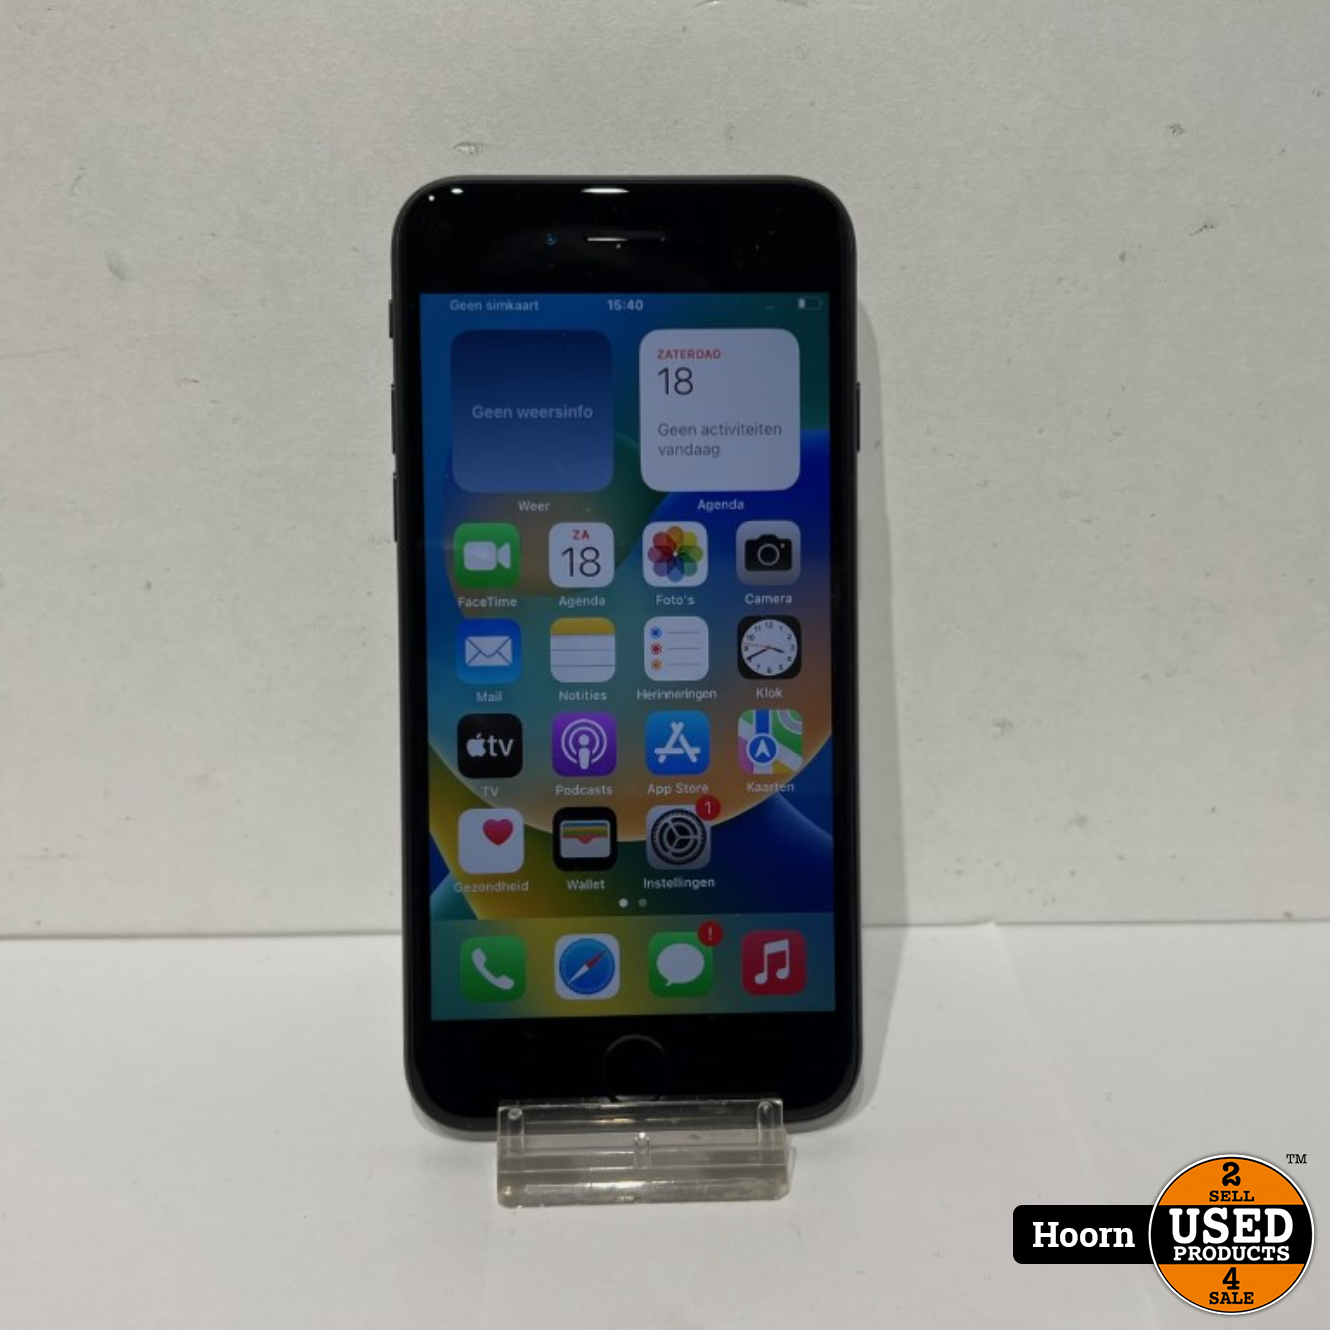 iPhone 64GB Zwart Los Toestel incl. Lader 92% - Used Products Hoorn